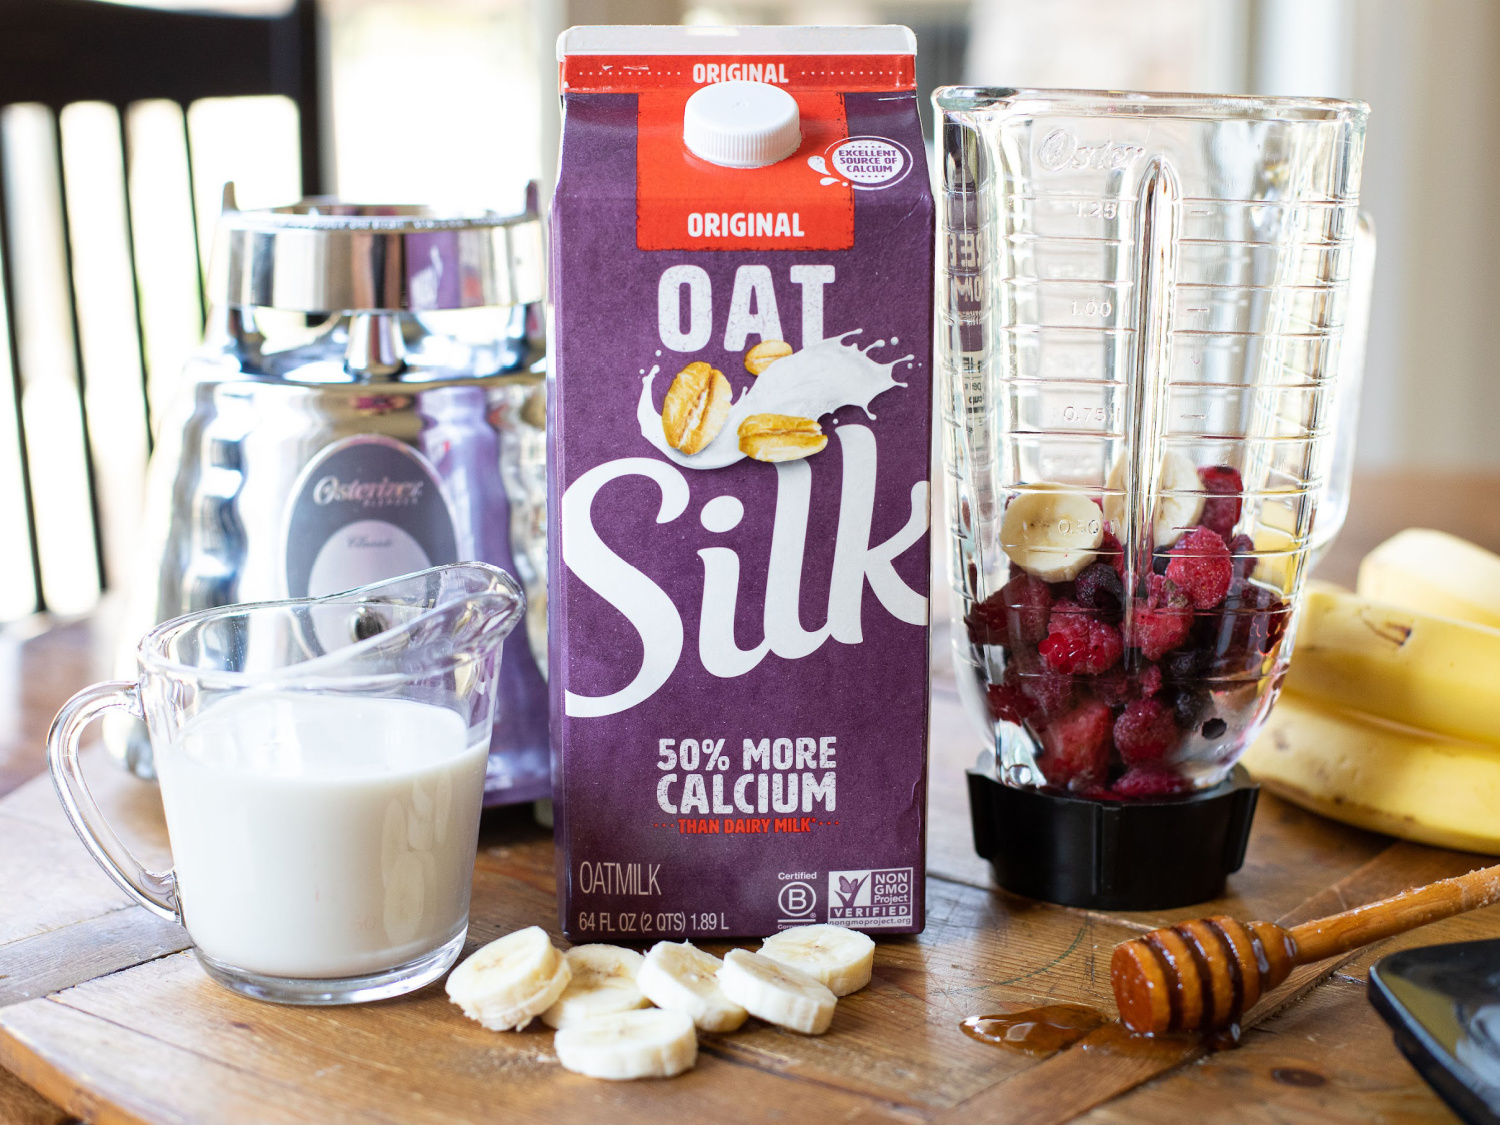 Pick Up Silk & So Delicious Products And Save BIG At Publix